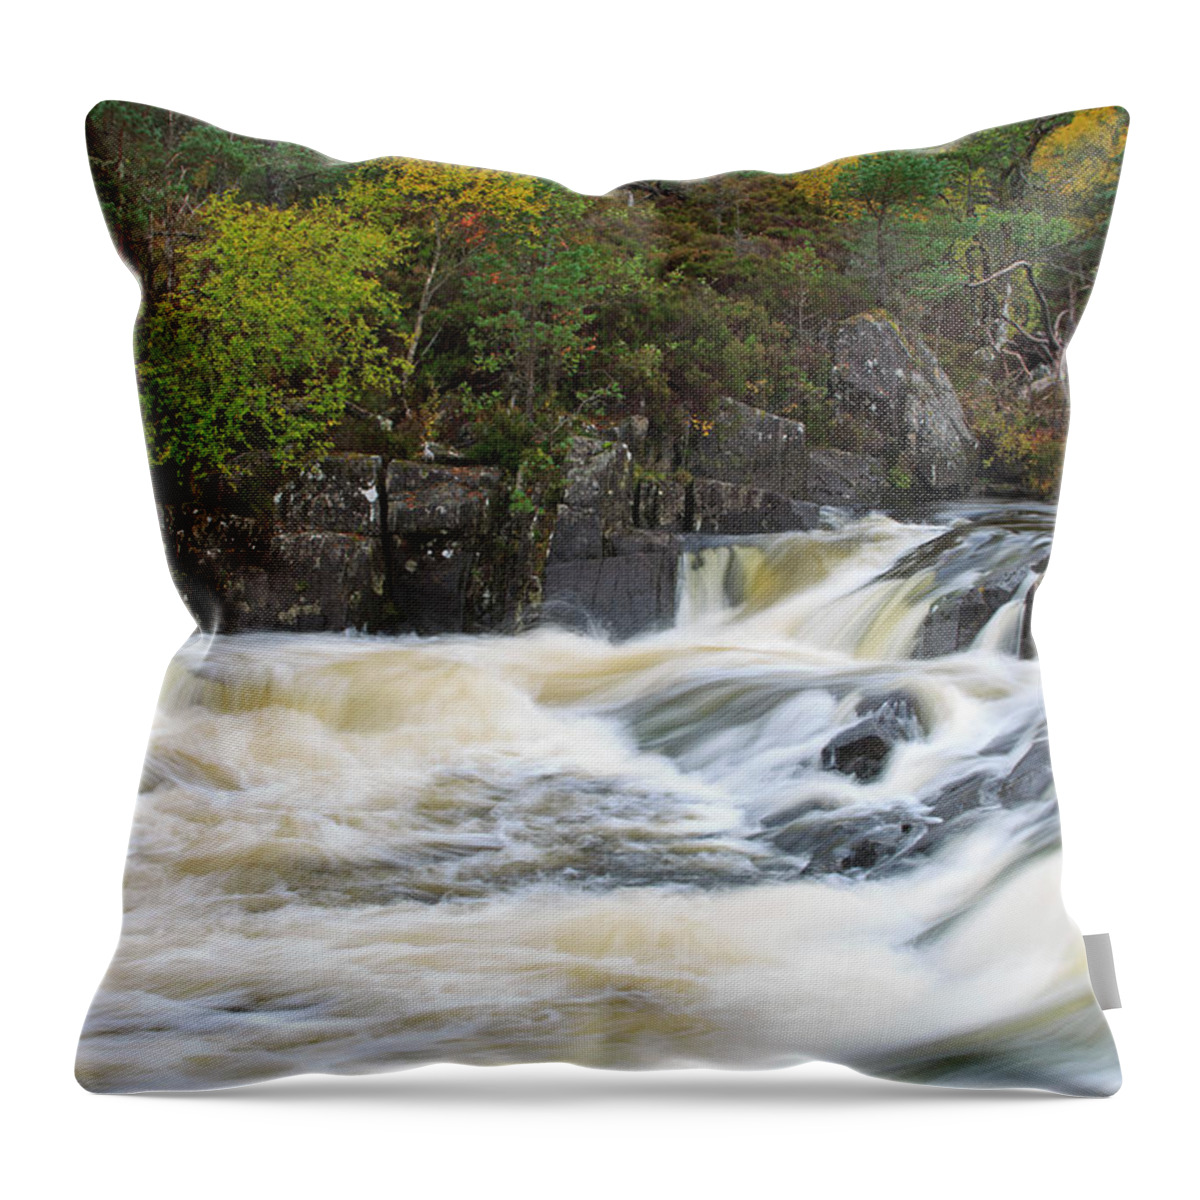 Scenics Throw Pillow featuring the photograph Affric River In Autumn, Scottish by Louise Heusinkveld